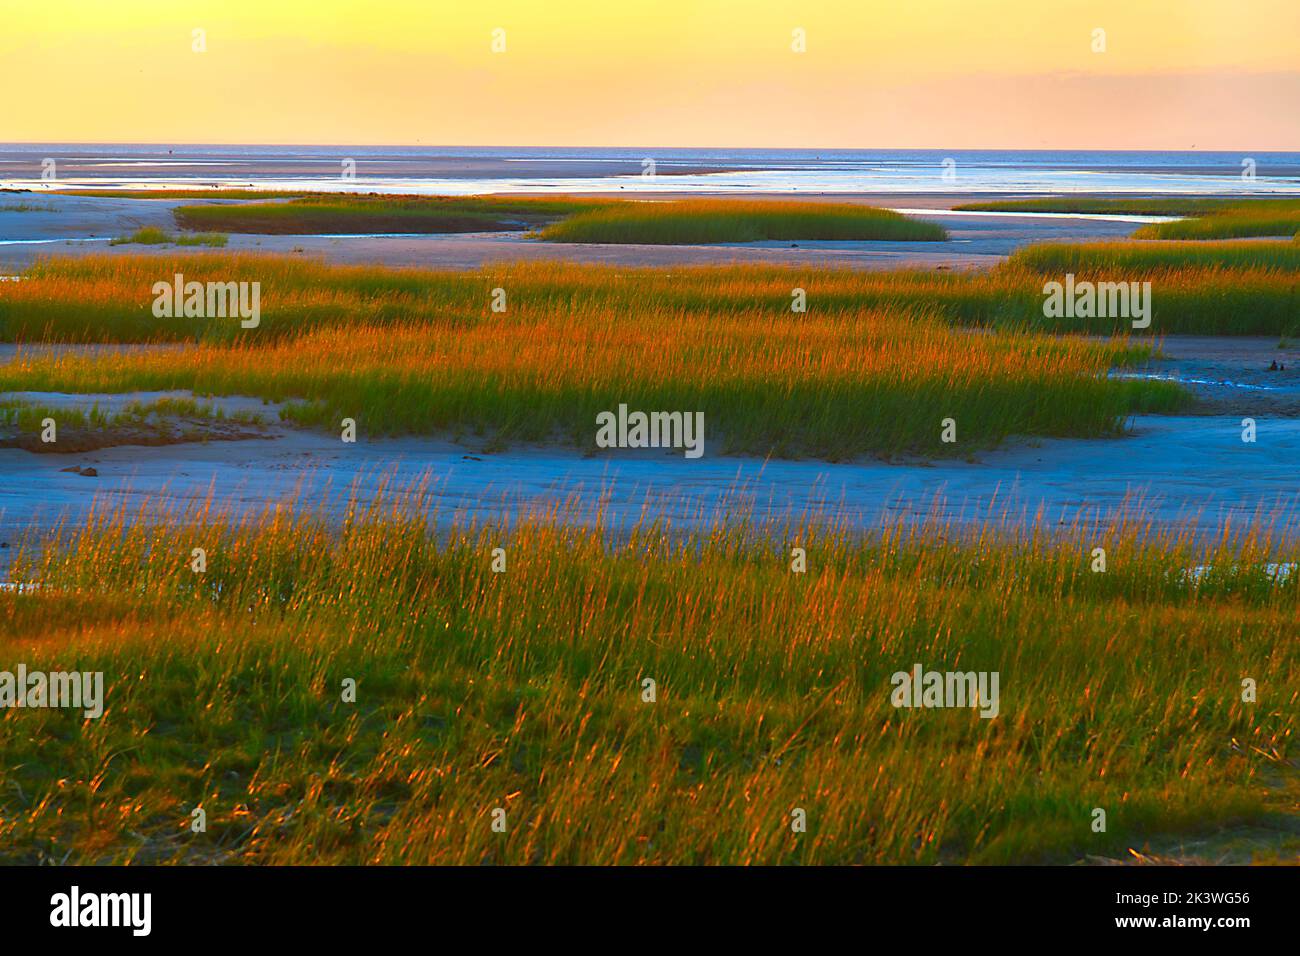 looking towards Cape Cod Bay from the Paine's Creek in Brewster, Massachusetts on Cape Cod, USA Stock Photo